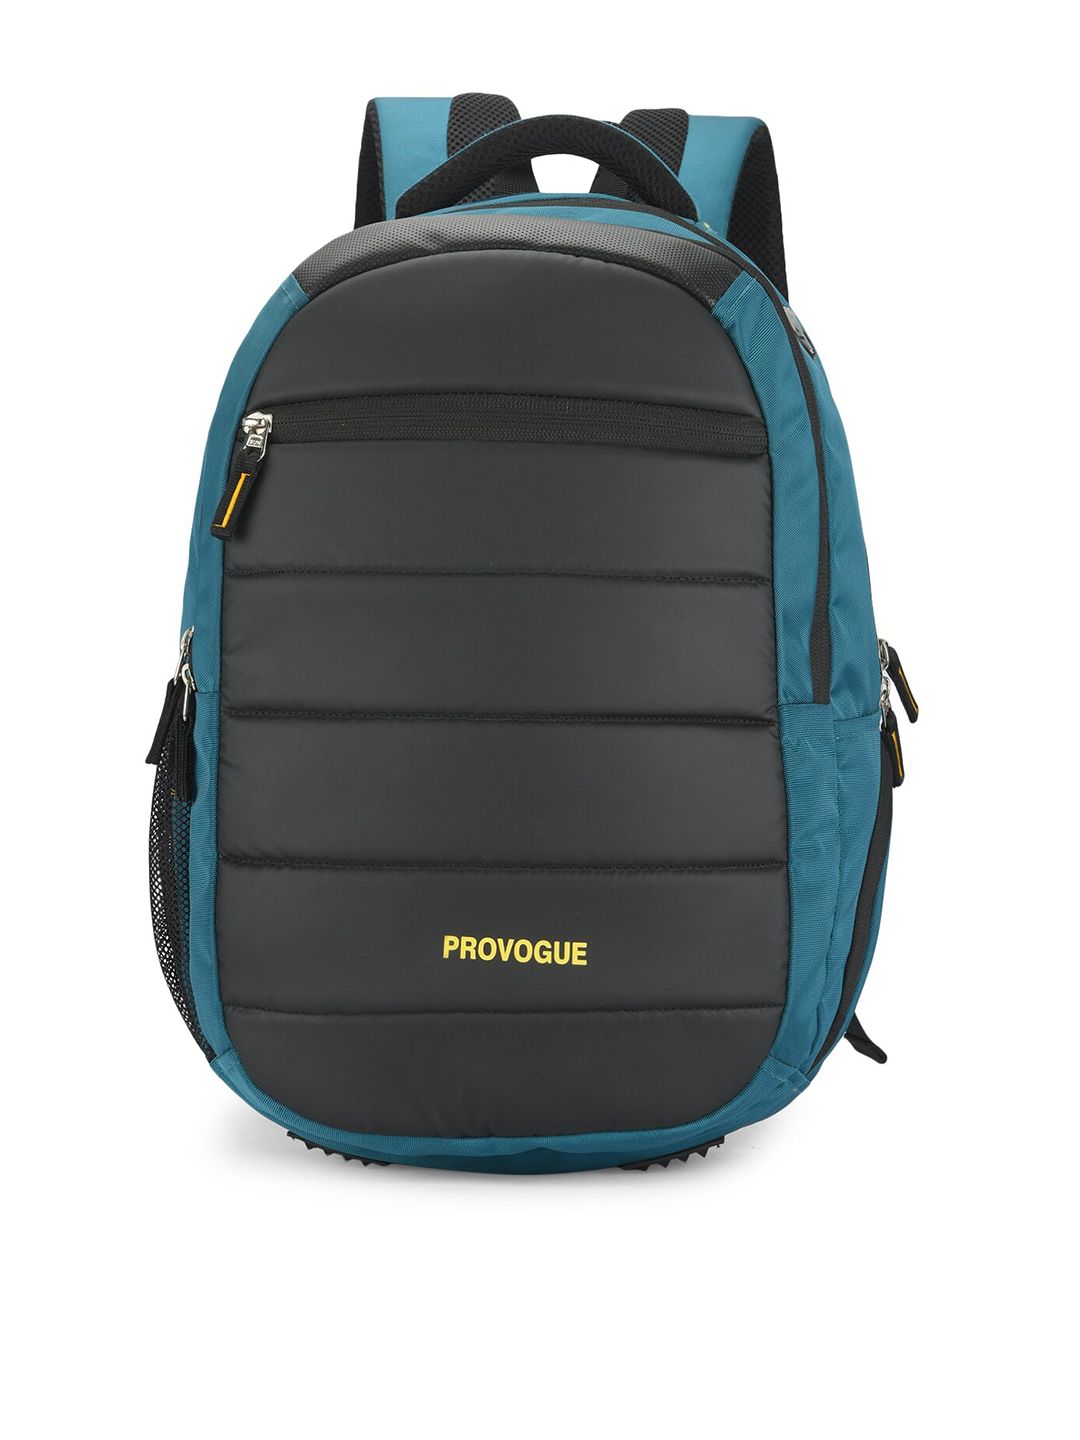 Provogue Unisex Teal & Black Brand Logo Backpack with Reflective Strip Price in India